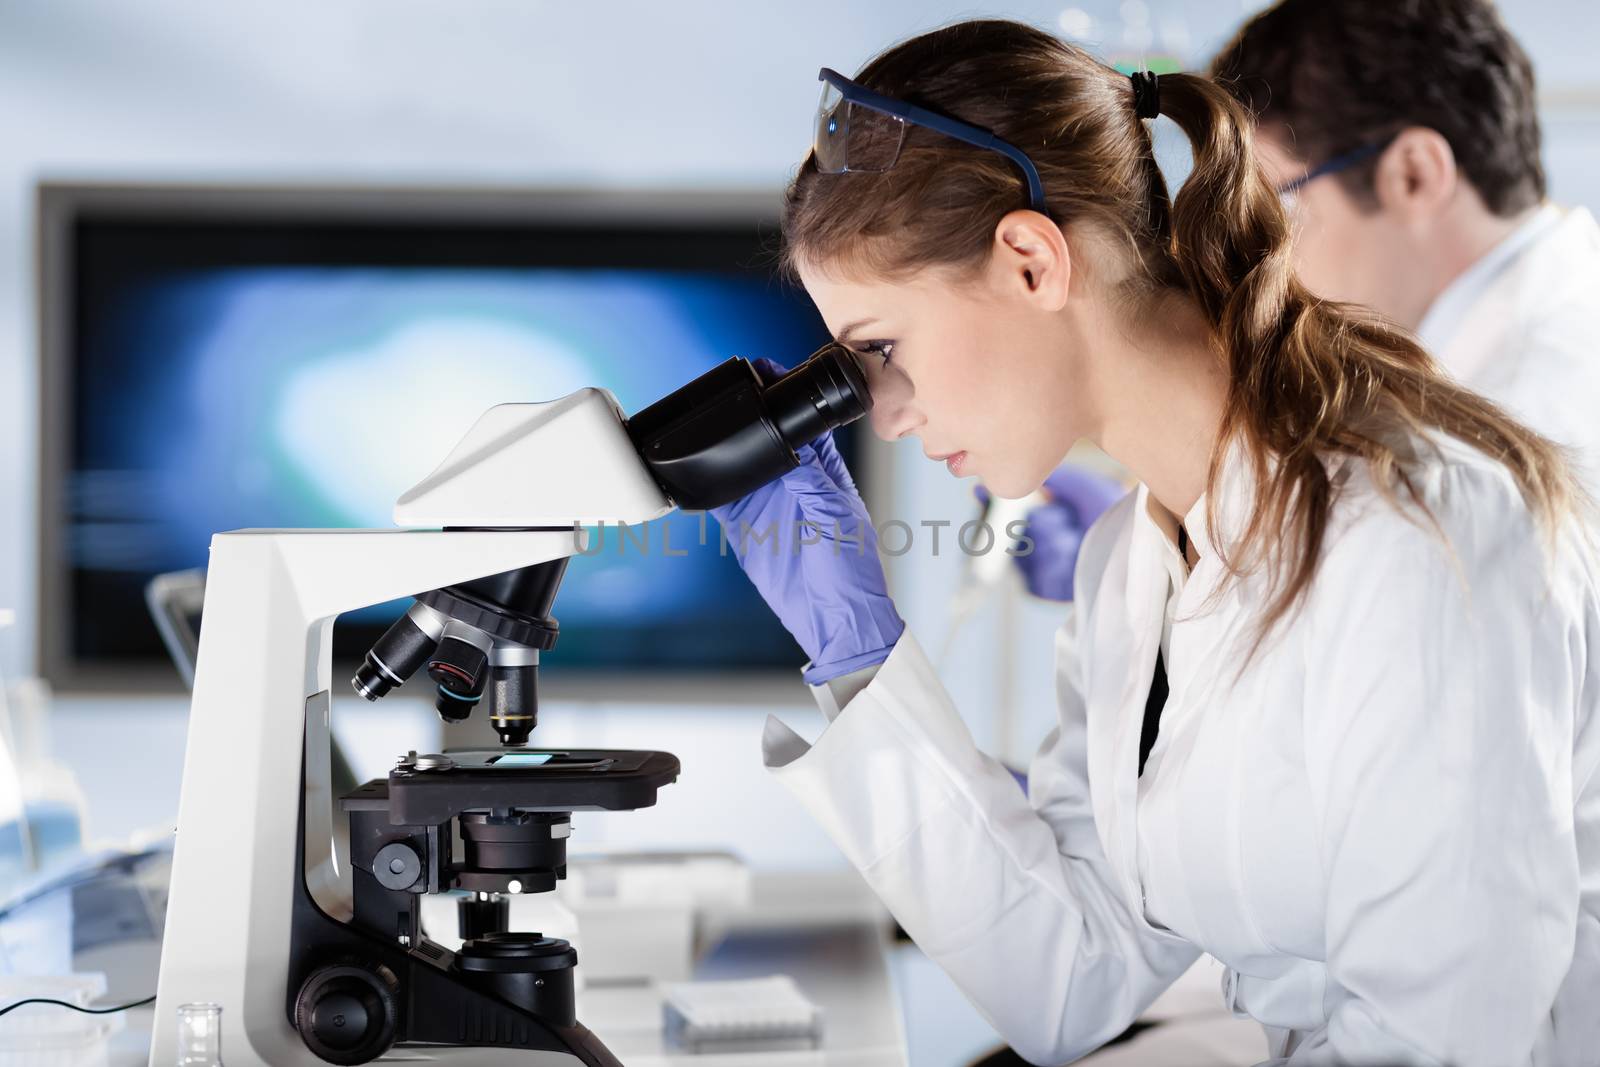 Life scientists researching in laboratory. Attractive female young scientist and her post doctoral supervisor microscoping in their working environment. Healthcare and biotechnology.